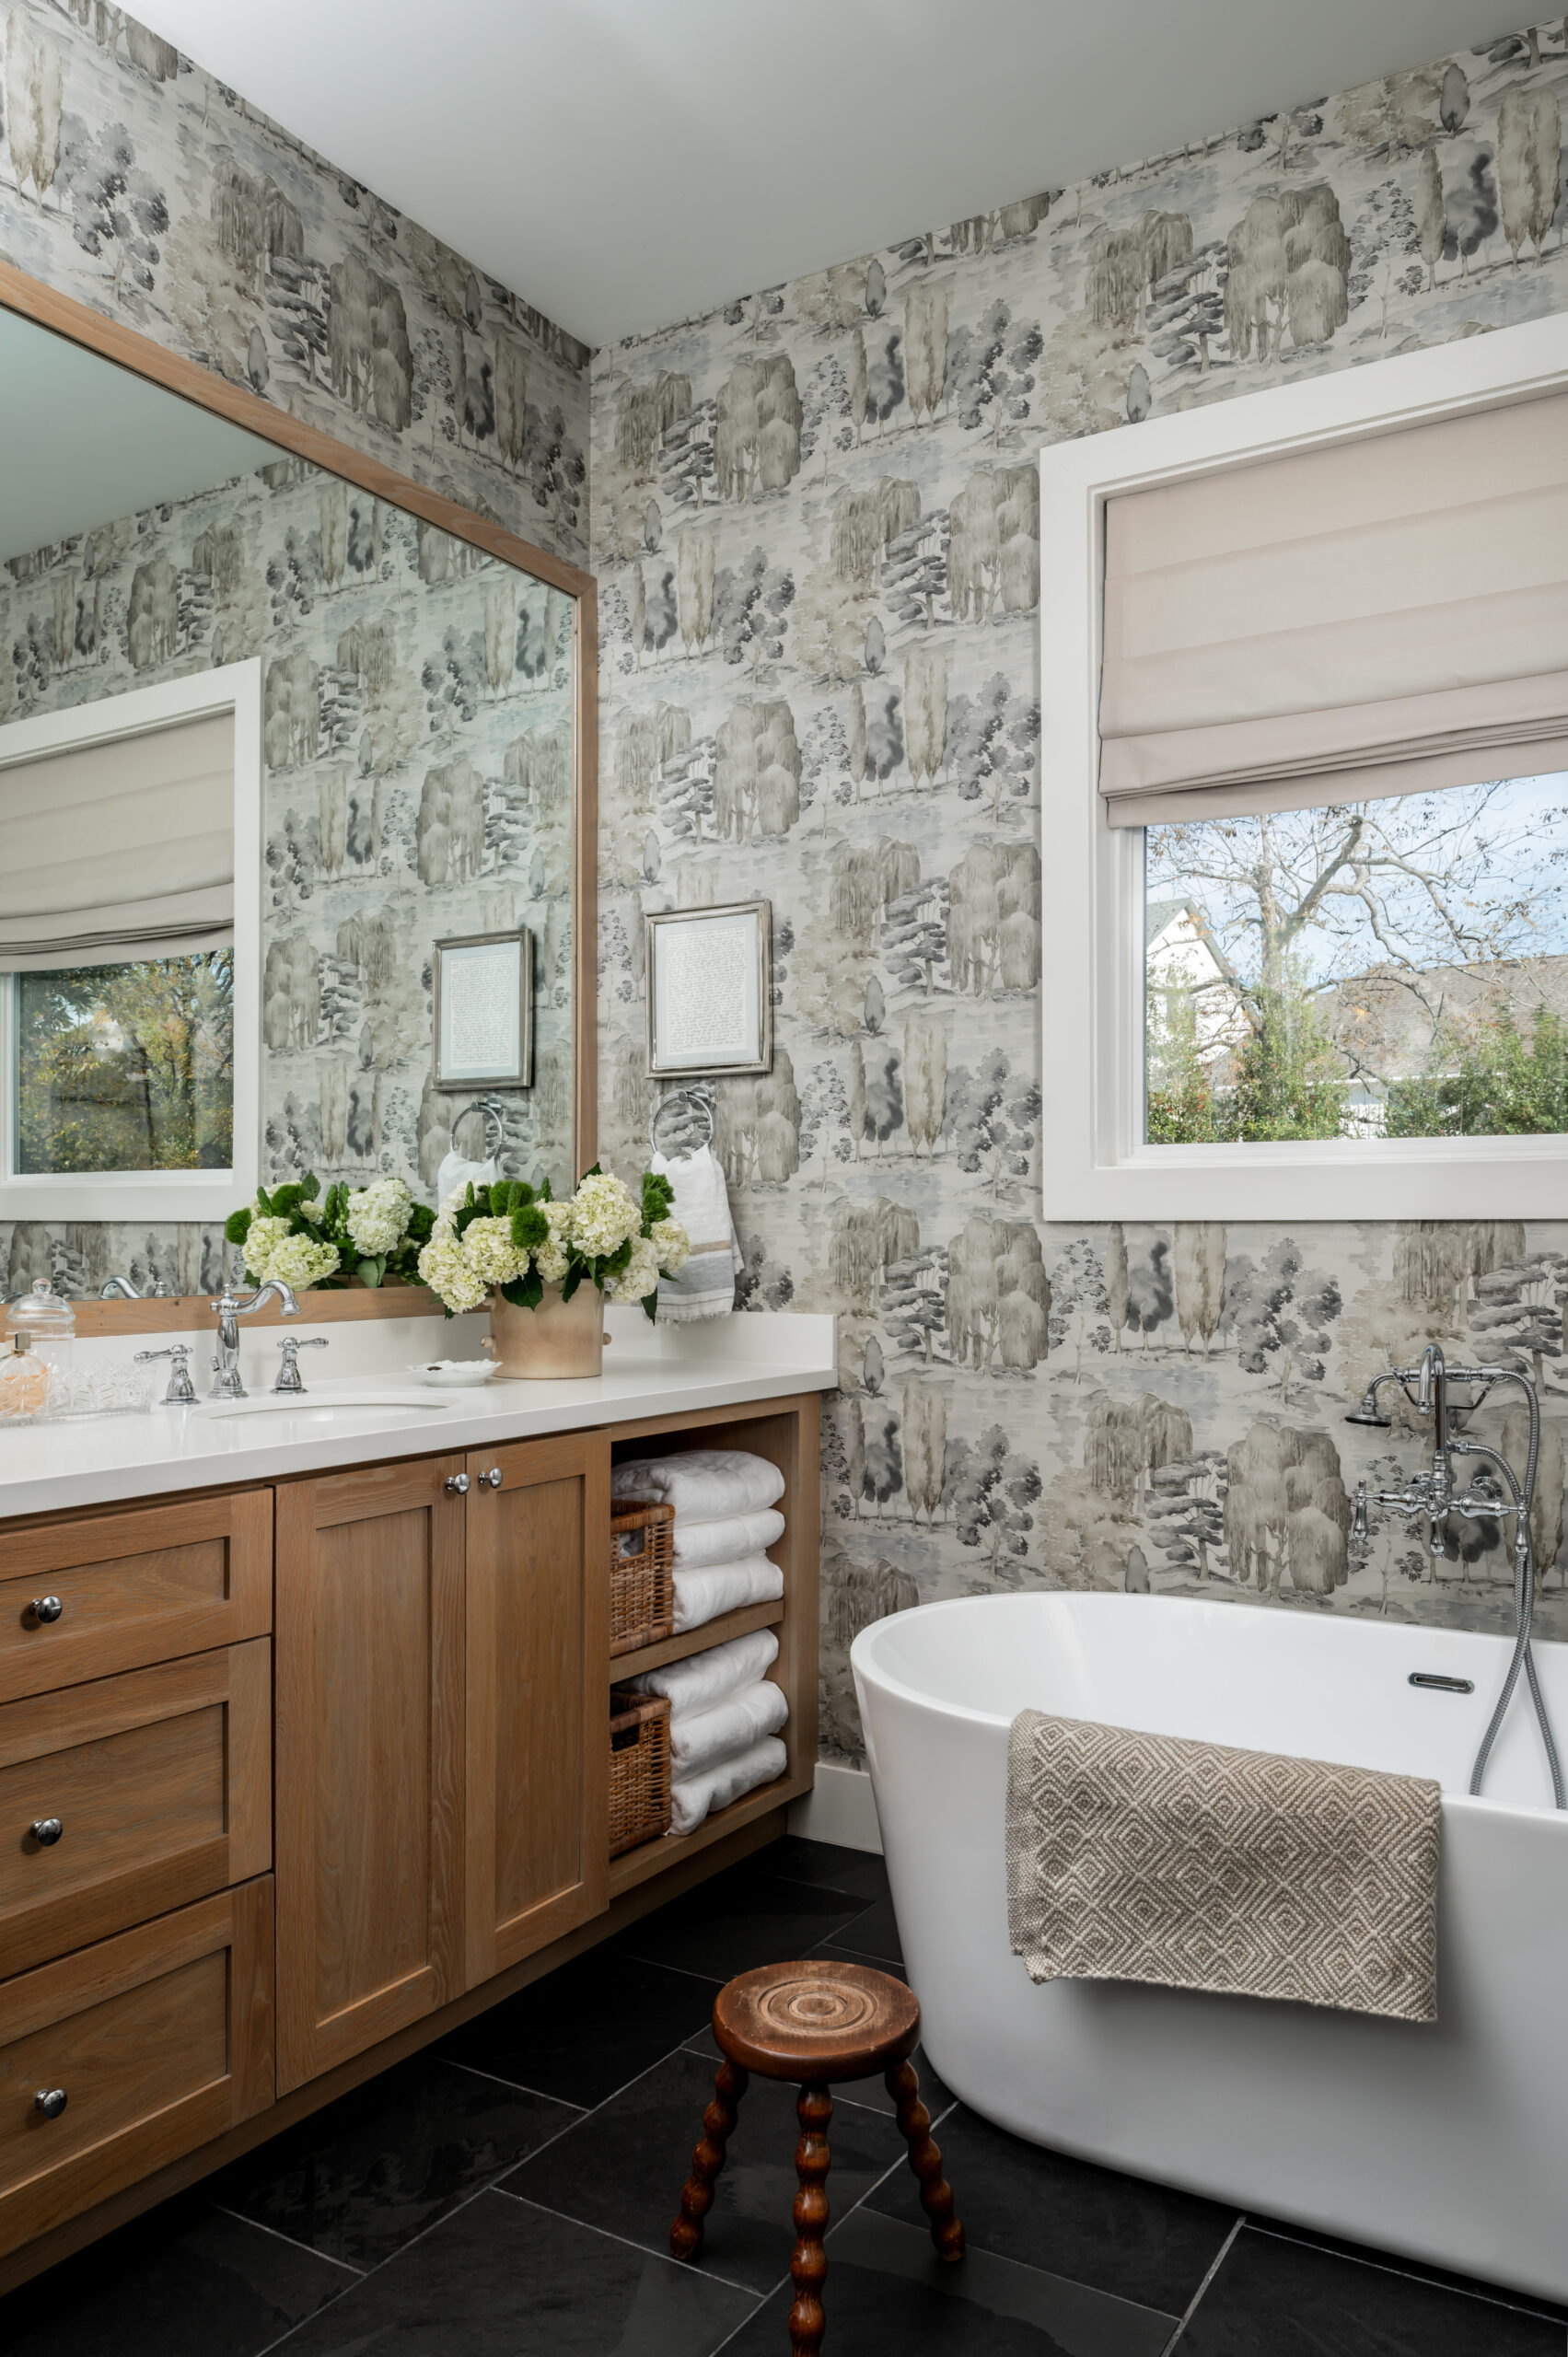 Gorgeous bathroom with wooden cabinets and unique wallpaper